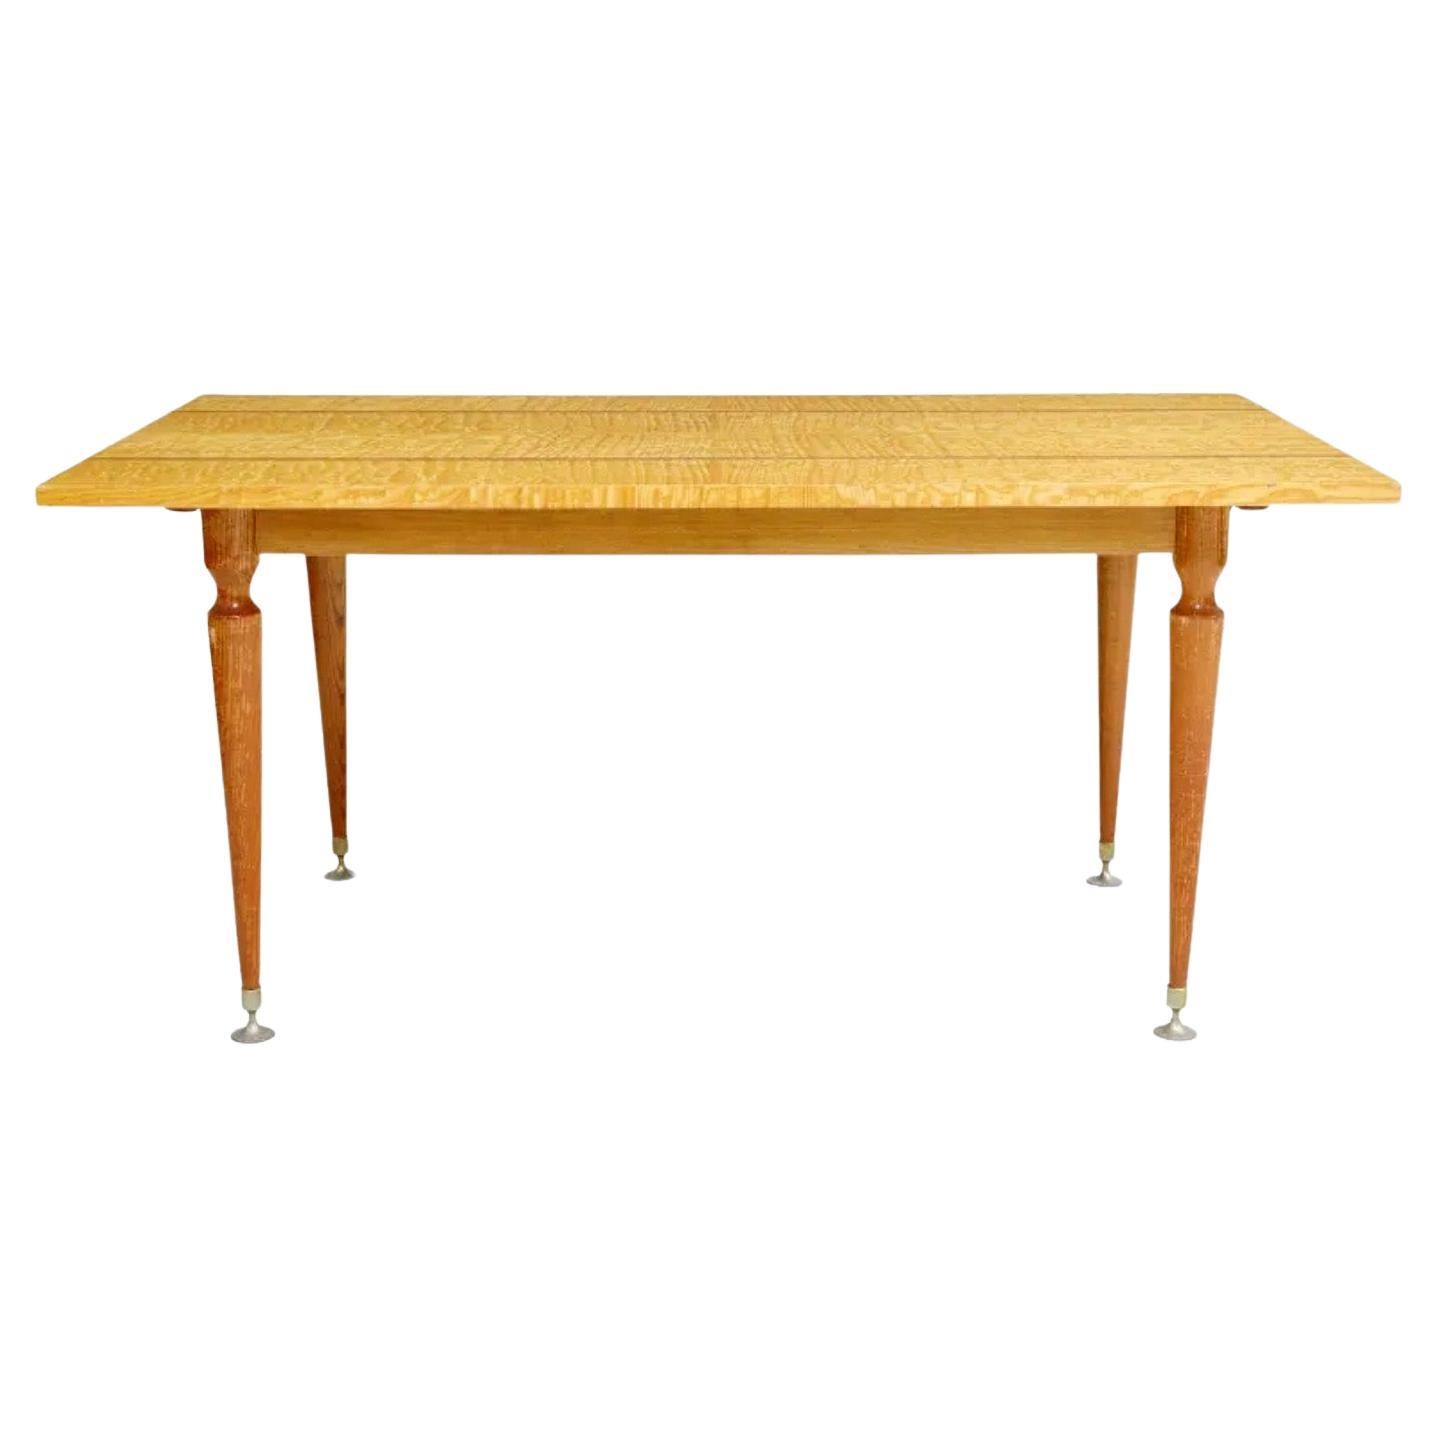 1950s French Mid-Century Modern Dining Table by NF Ameublement For Sale